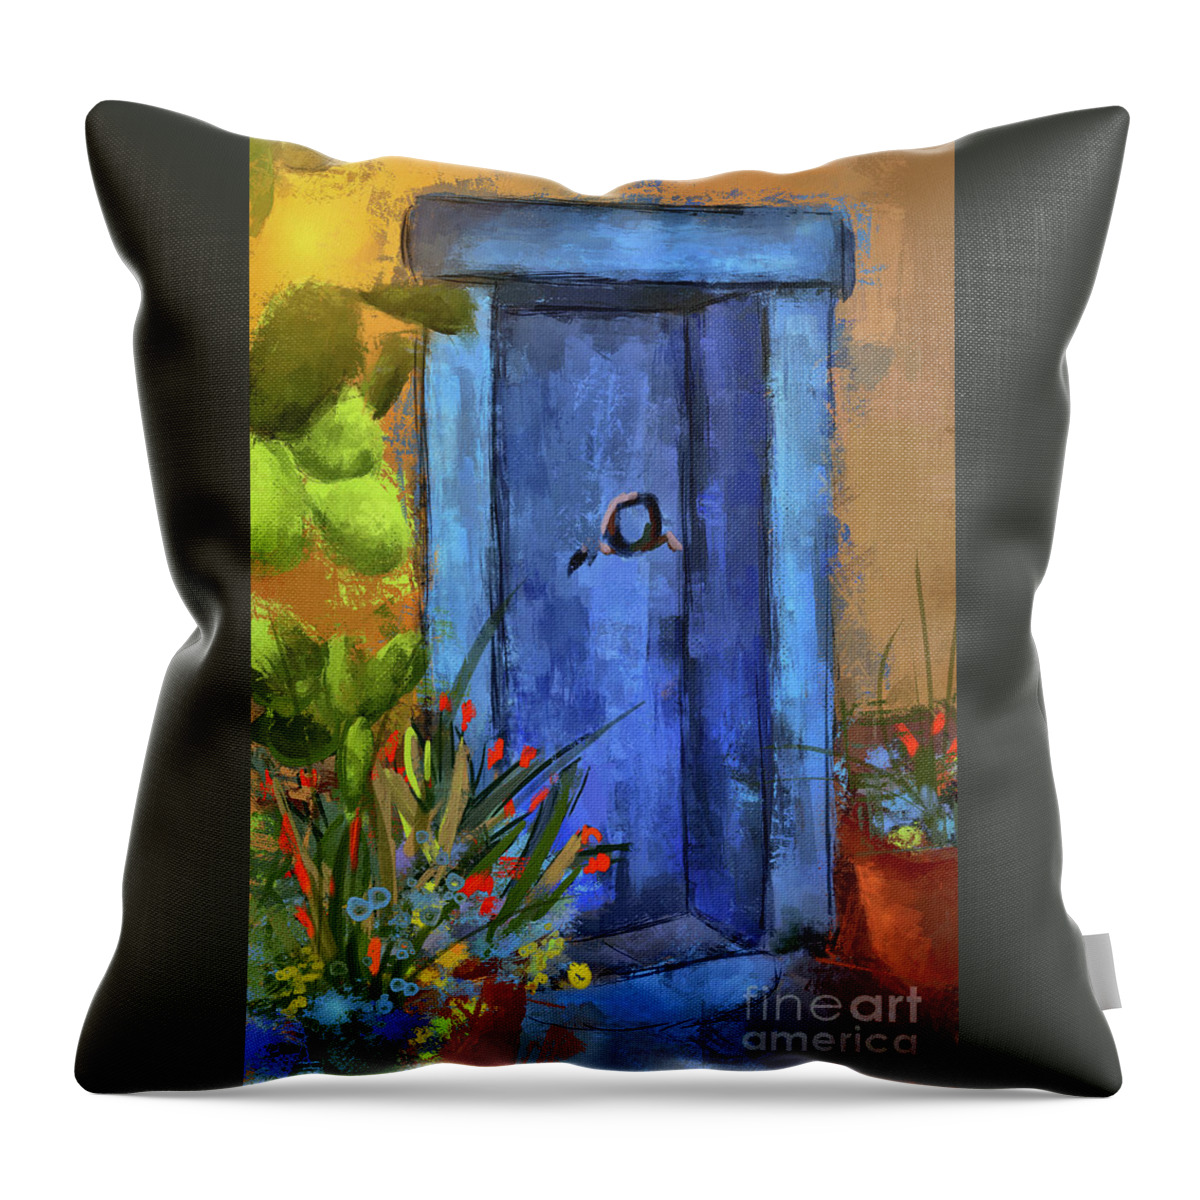 Tucson Throw Pillow featuring the digital art A Blue Door At The Barrio by Lois Bryan